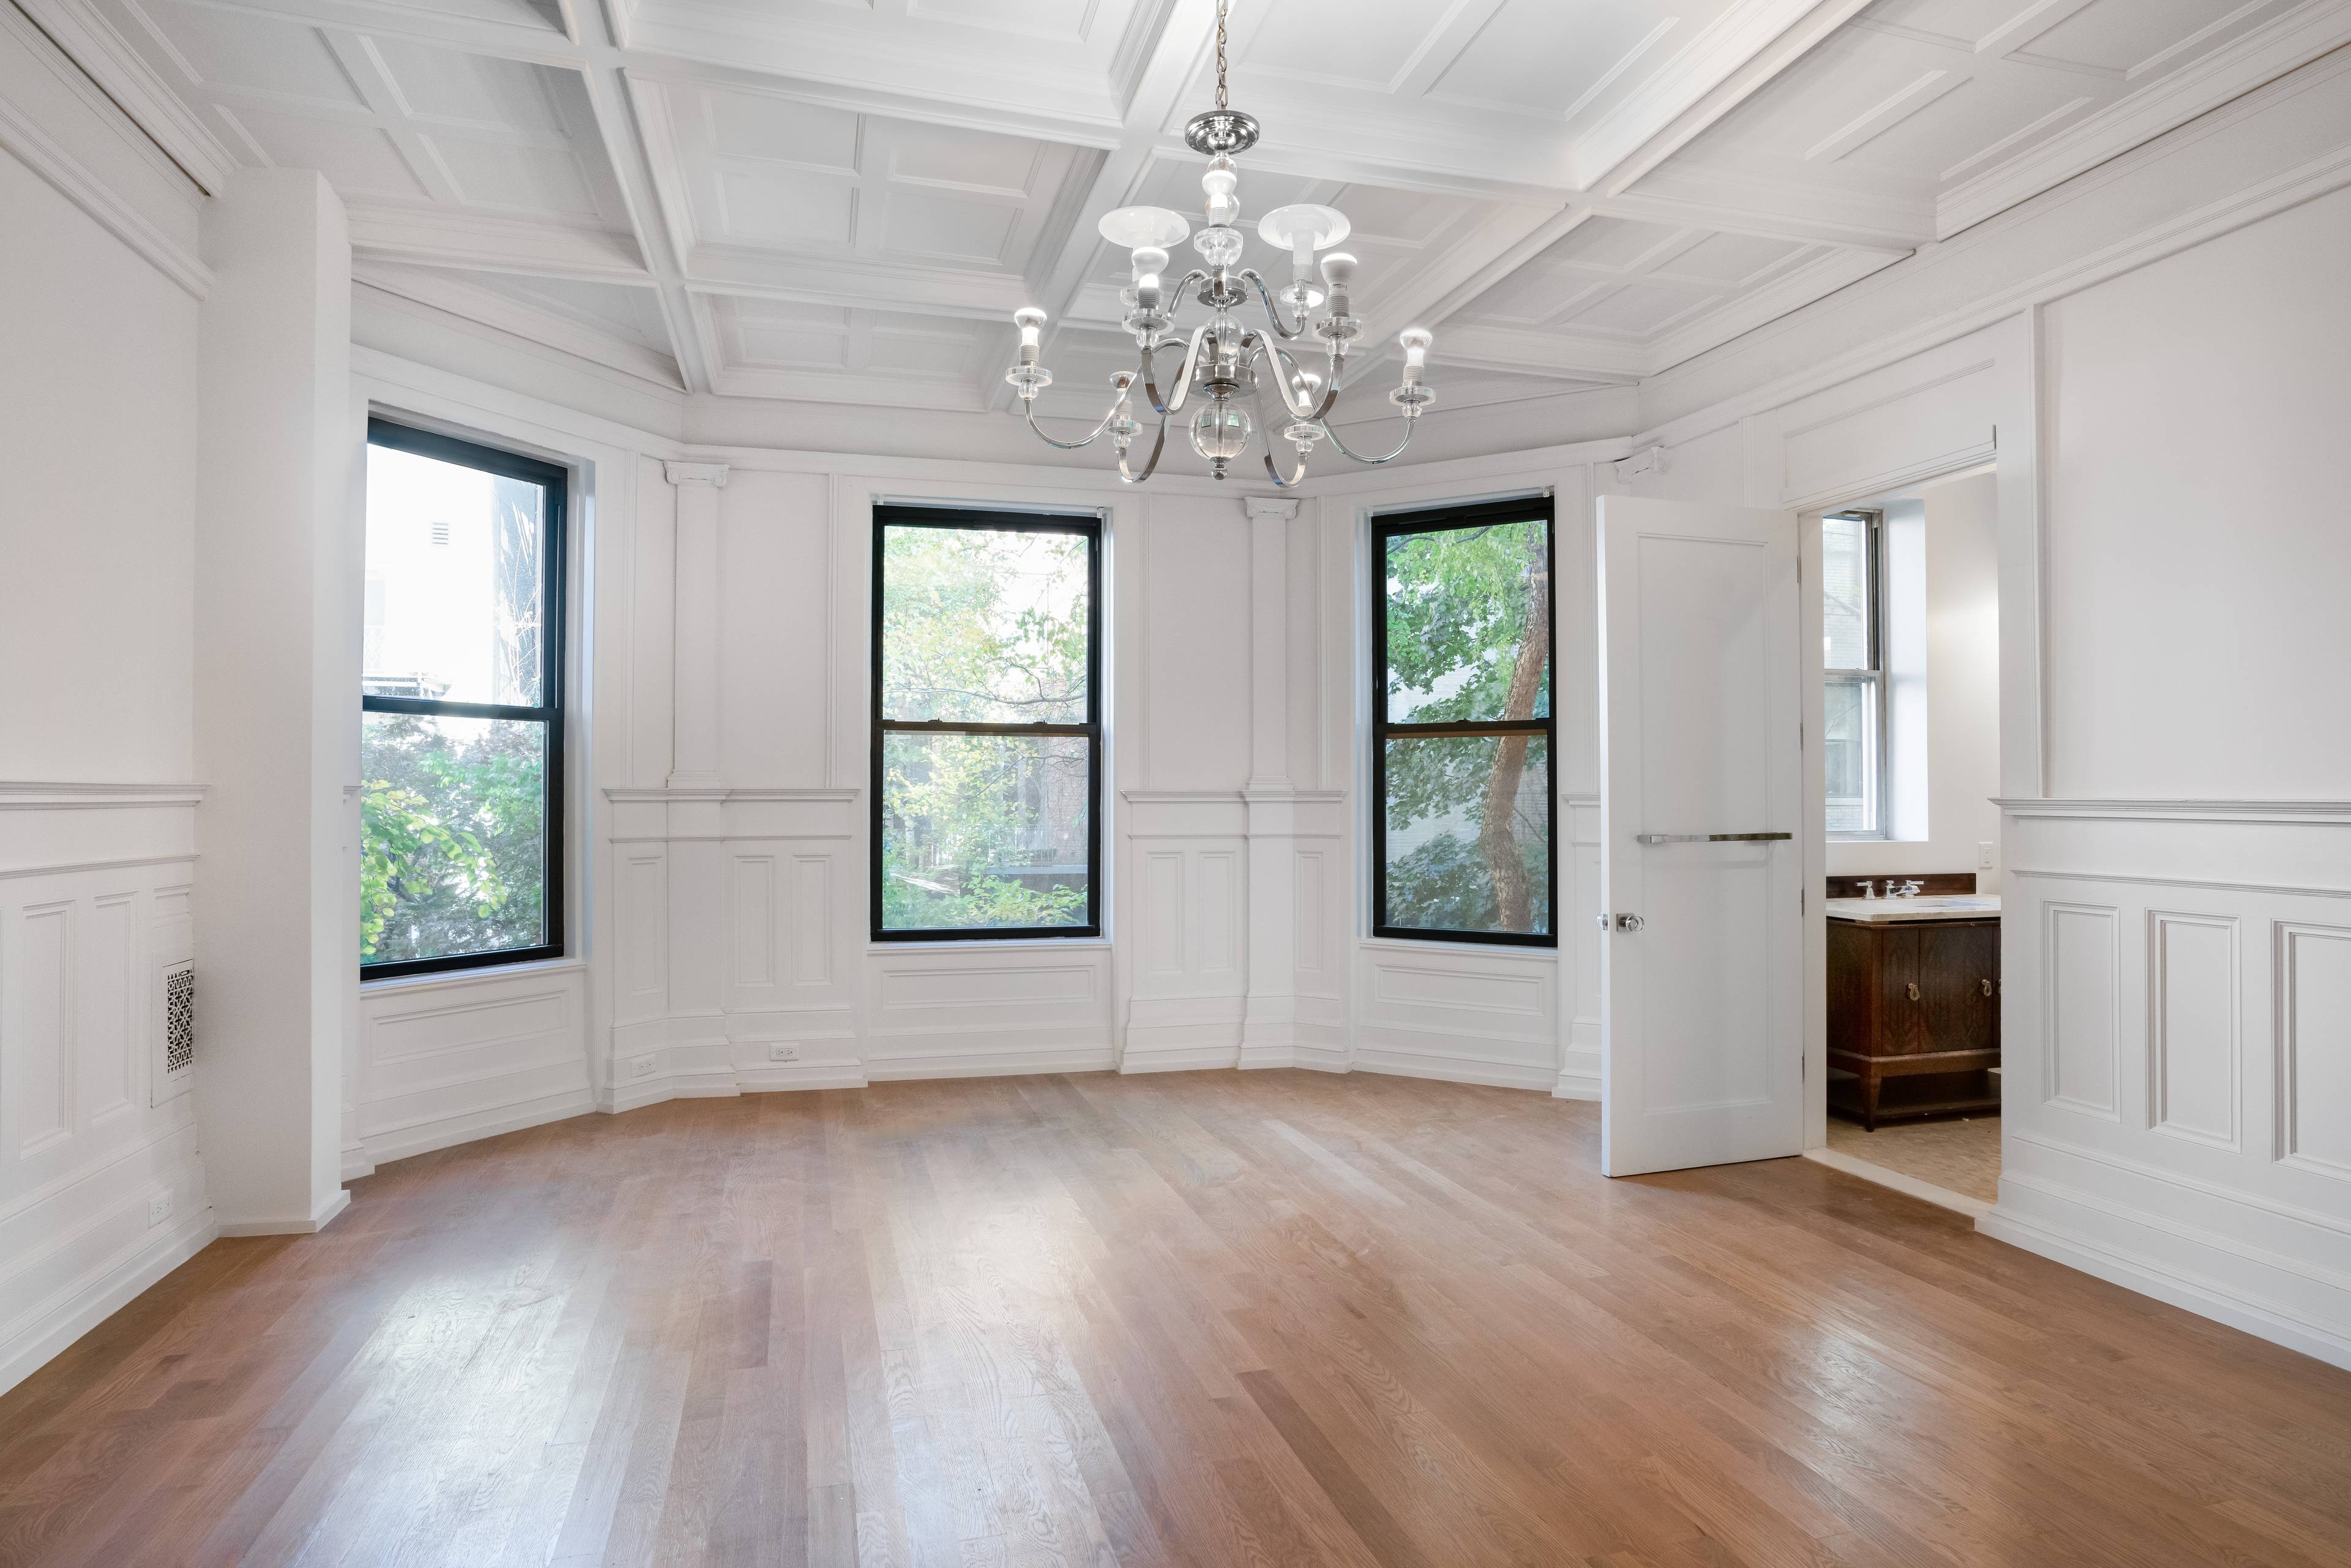 4 BEDROOM Flex 5 3 BATH Parlor DUPLEX, Upper West Side BRAND NEW RENOVATIONS to this stunning 25' wide historic, pre war mansion have transformed this parlor level DUPLEX into ...